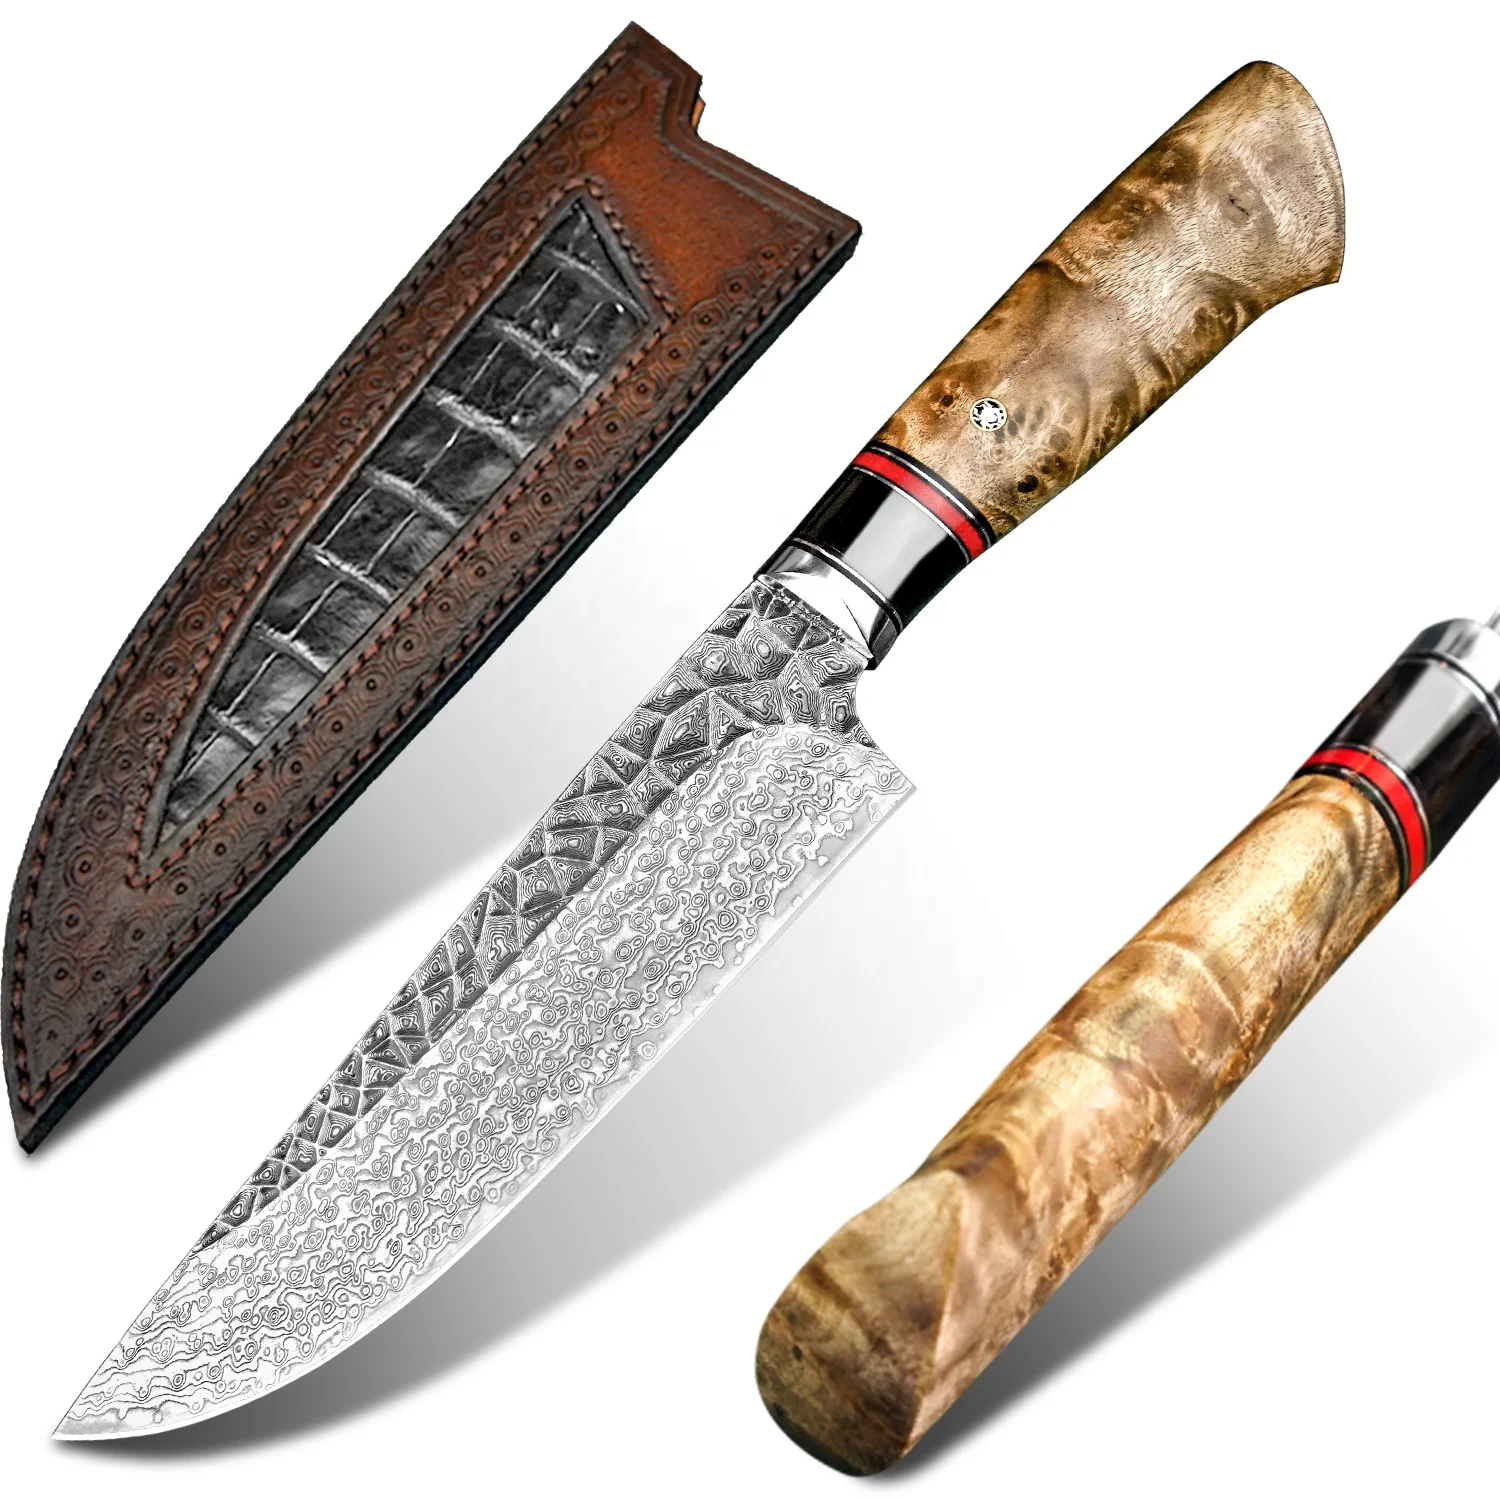 

Handmade 6.8in Burl Stabilized Handle VG10 Damascus Stainless Steel Blade Japanese Kitchen Chef Knife with Leather Sheath